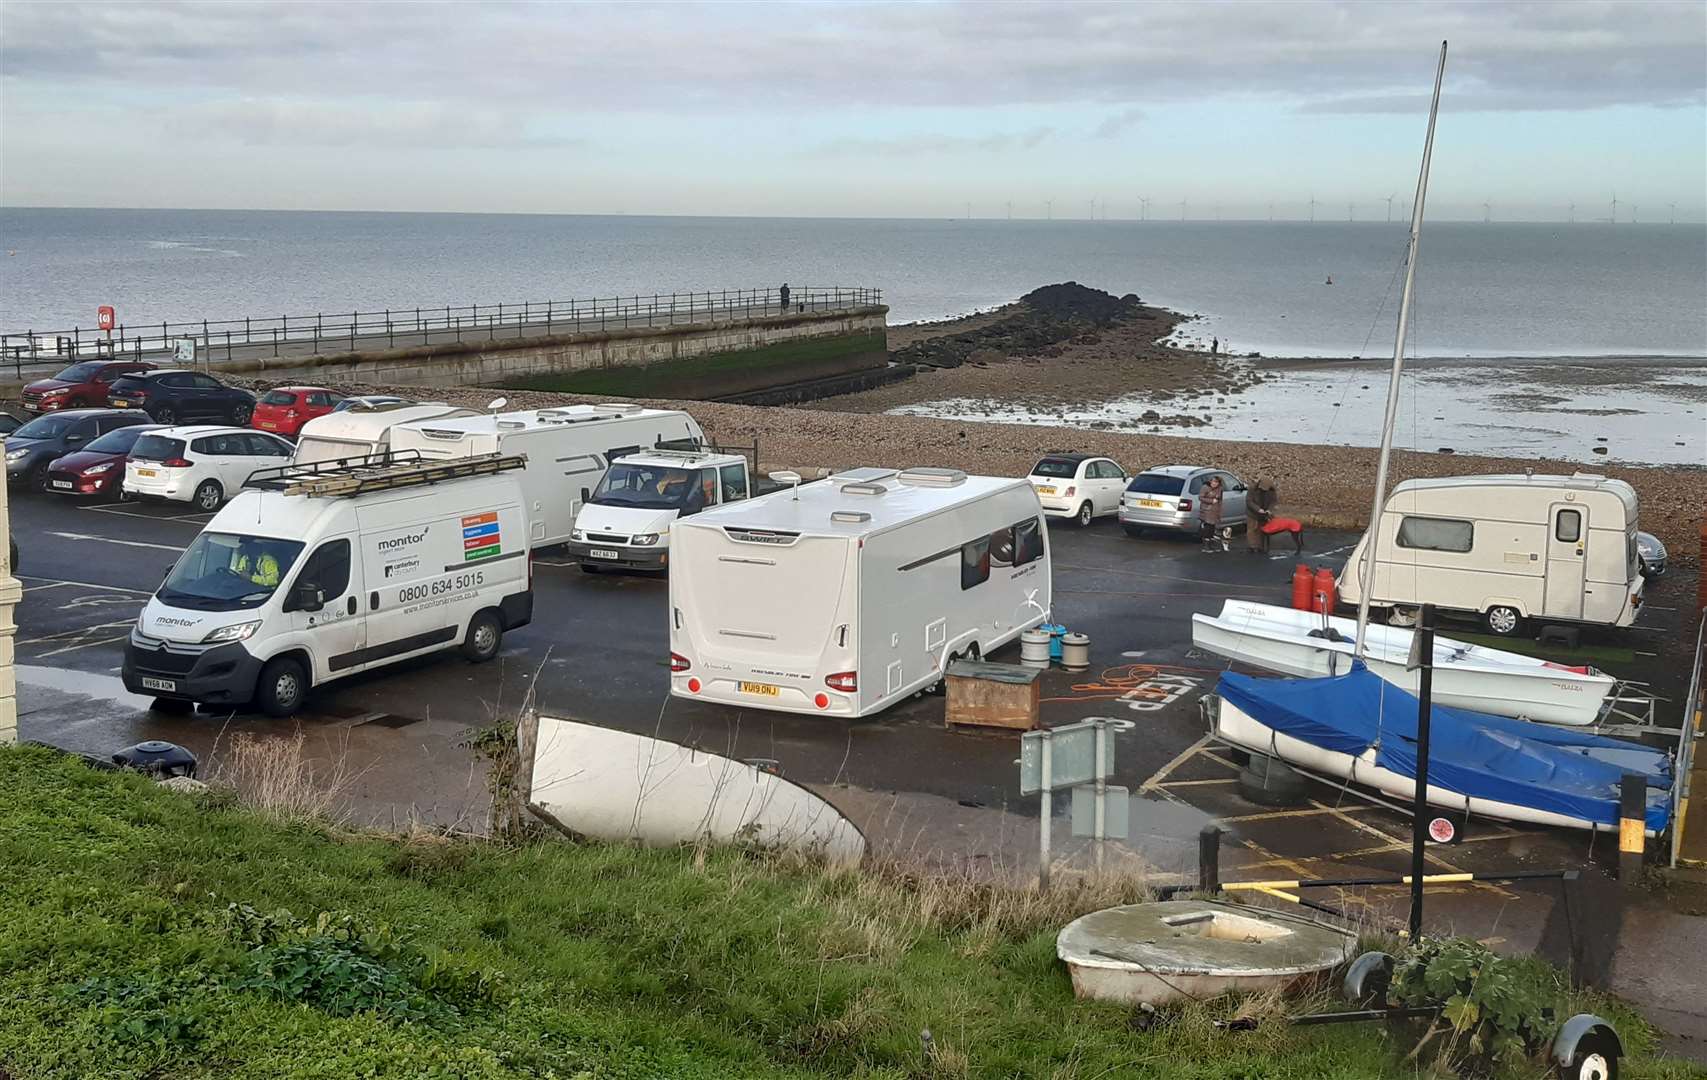 Travellers pitch up in the Hampton Pier car park in Herne Bay